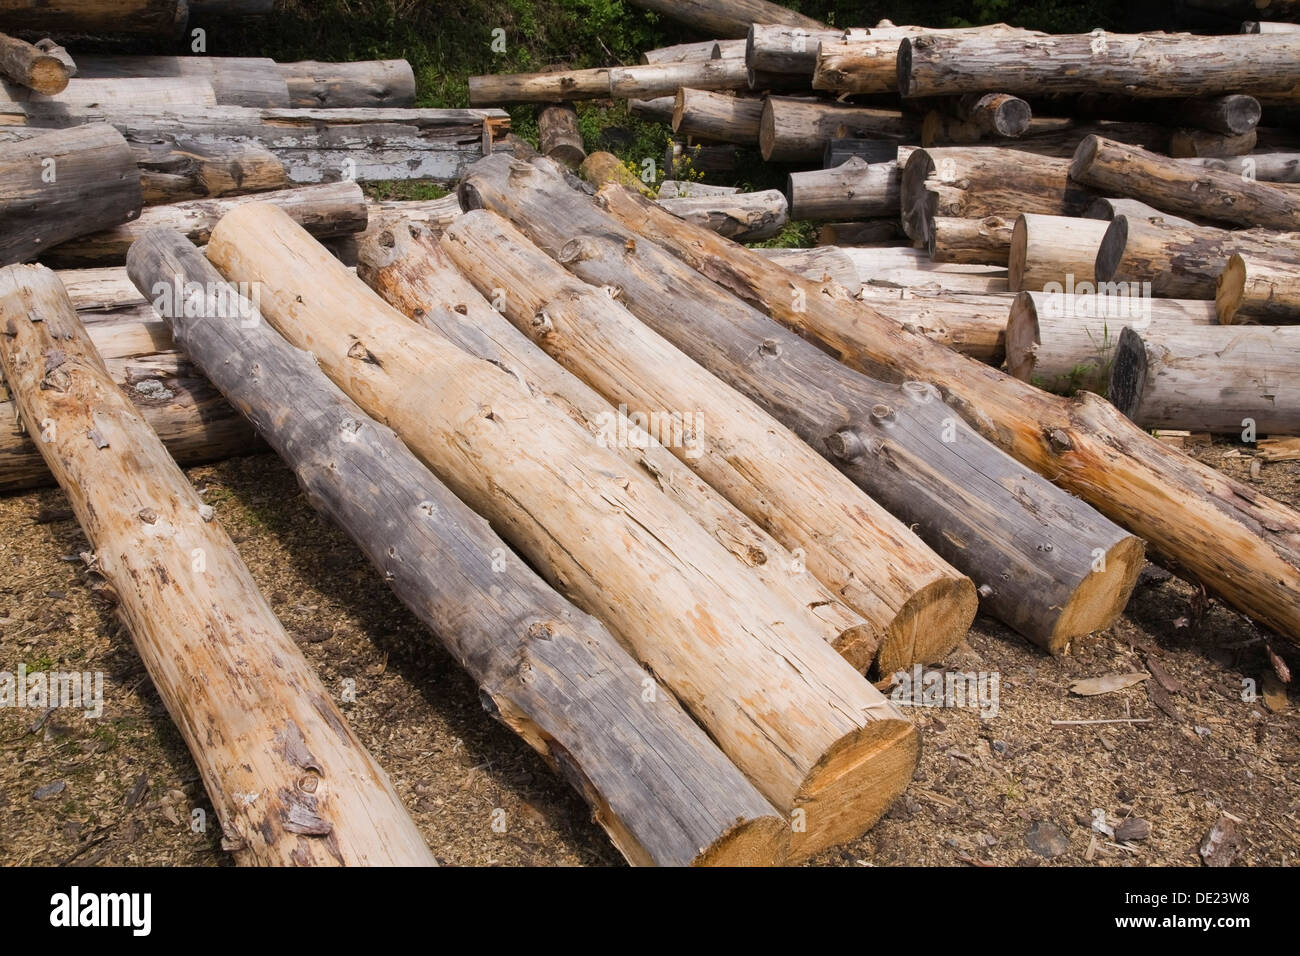 Stack of Eastern white pine tree logs, Laurentians, Quebec, Canada Stock Photo